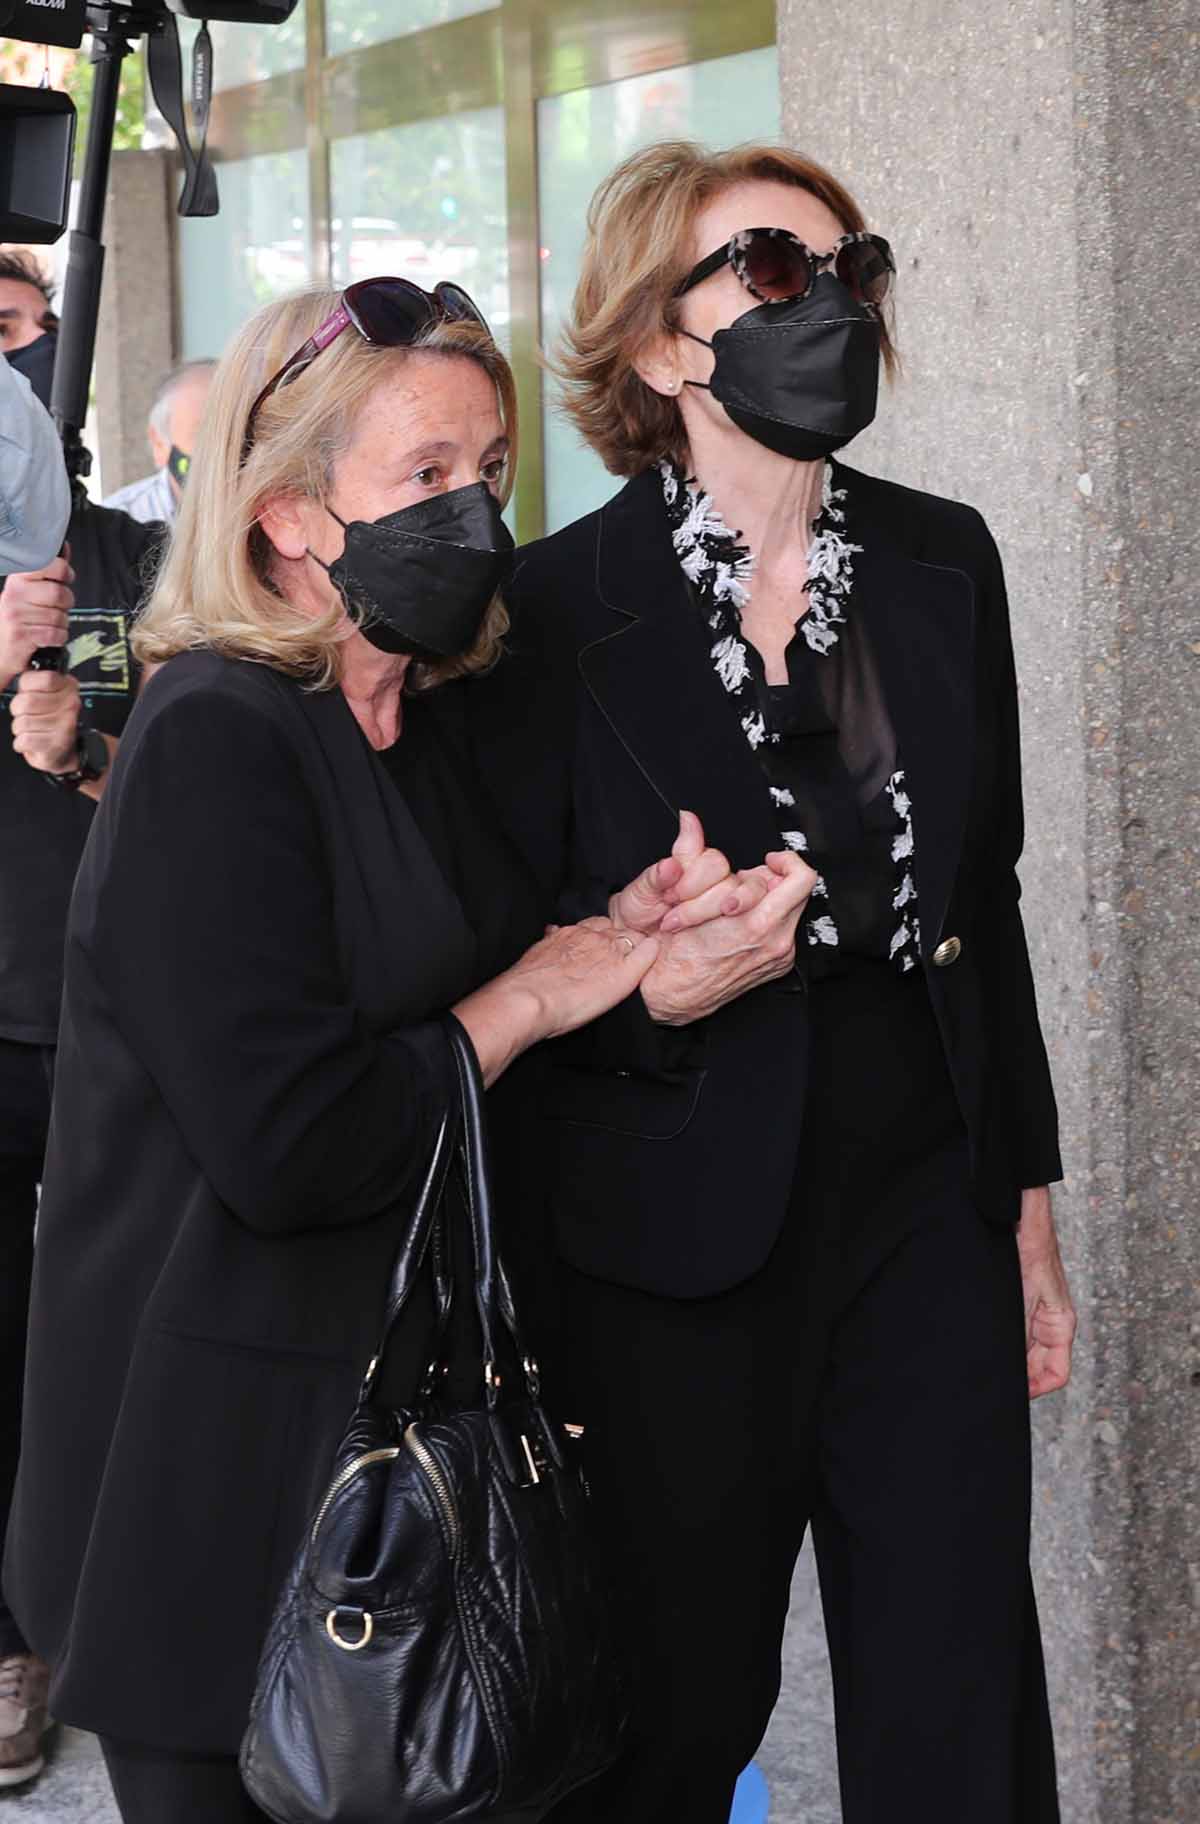 during the burial of Mila ximenez in Madrid 23 June 2021